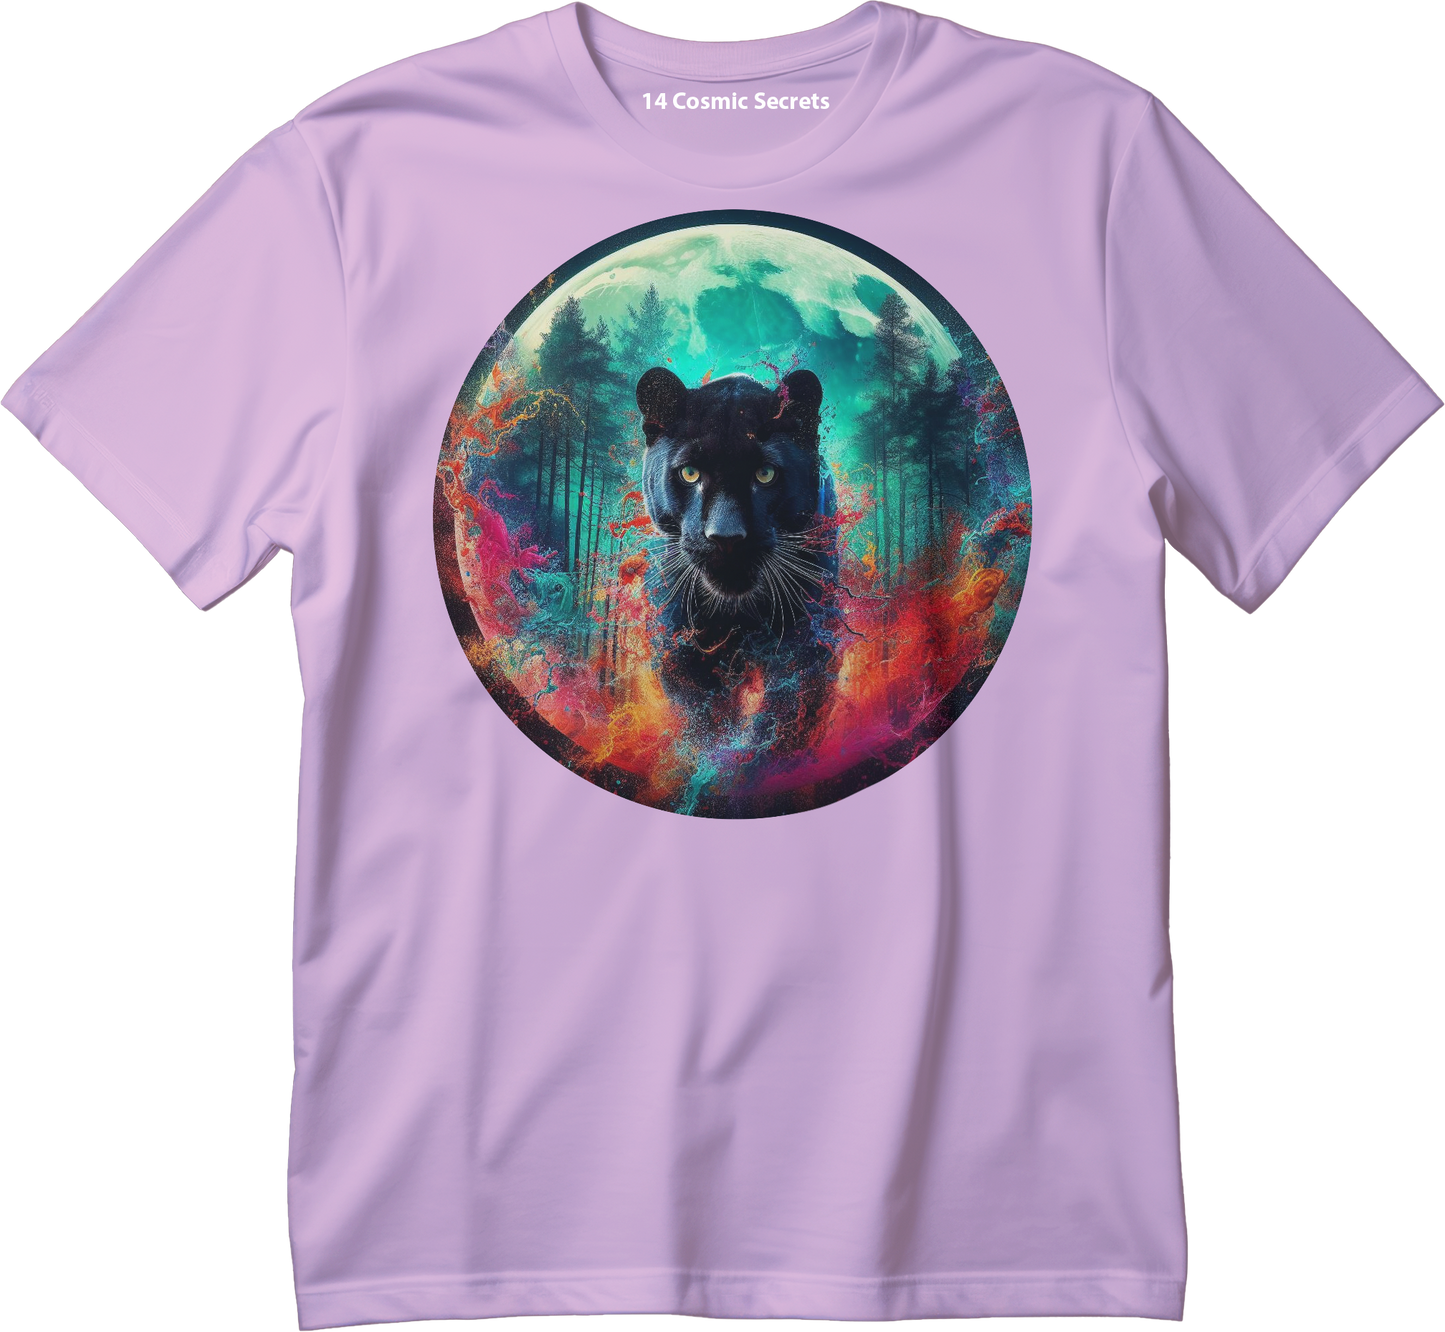 The Mesmerizing Gaze Graphic Printed T-Shirt  Cotton T-Shirt Magnificence of India T-Shirt